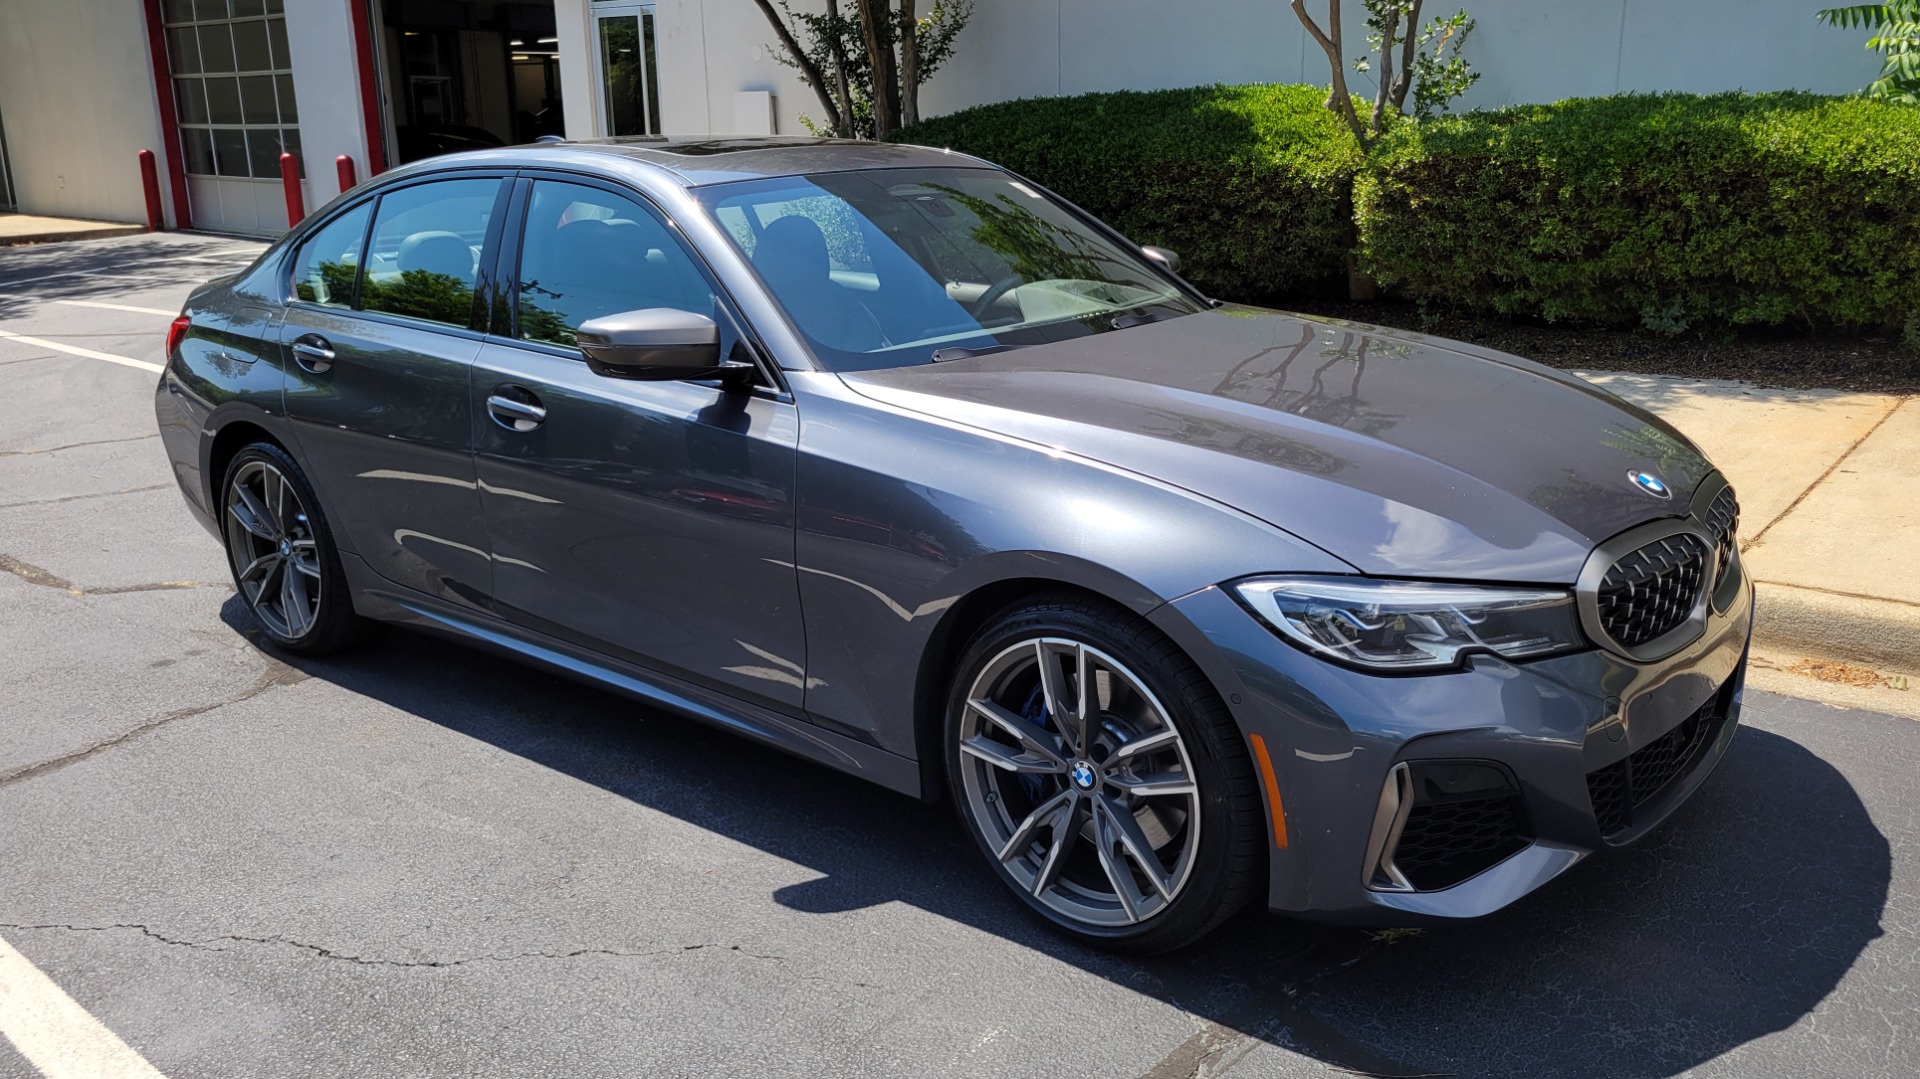 Used 2020 BMW 3 SERIES M340I XDRIVE / PREMIUM / DRVR ASST / H/K SND / REARVIEW for sale $49,595 at Formula Imports in Charlotte NC 28227 8